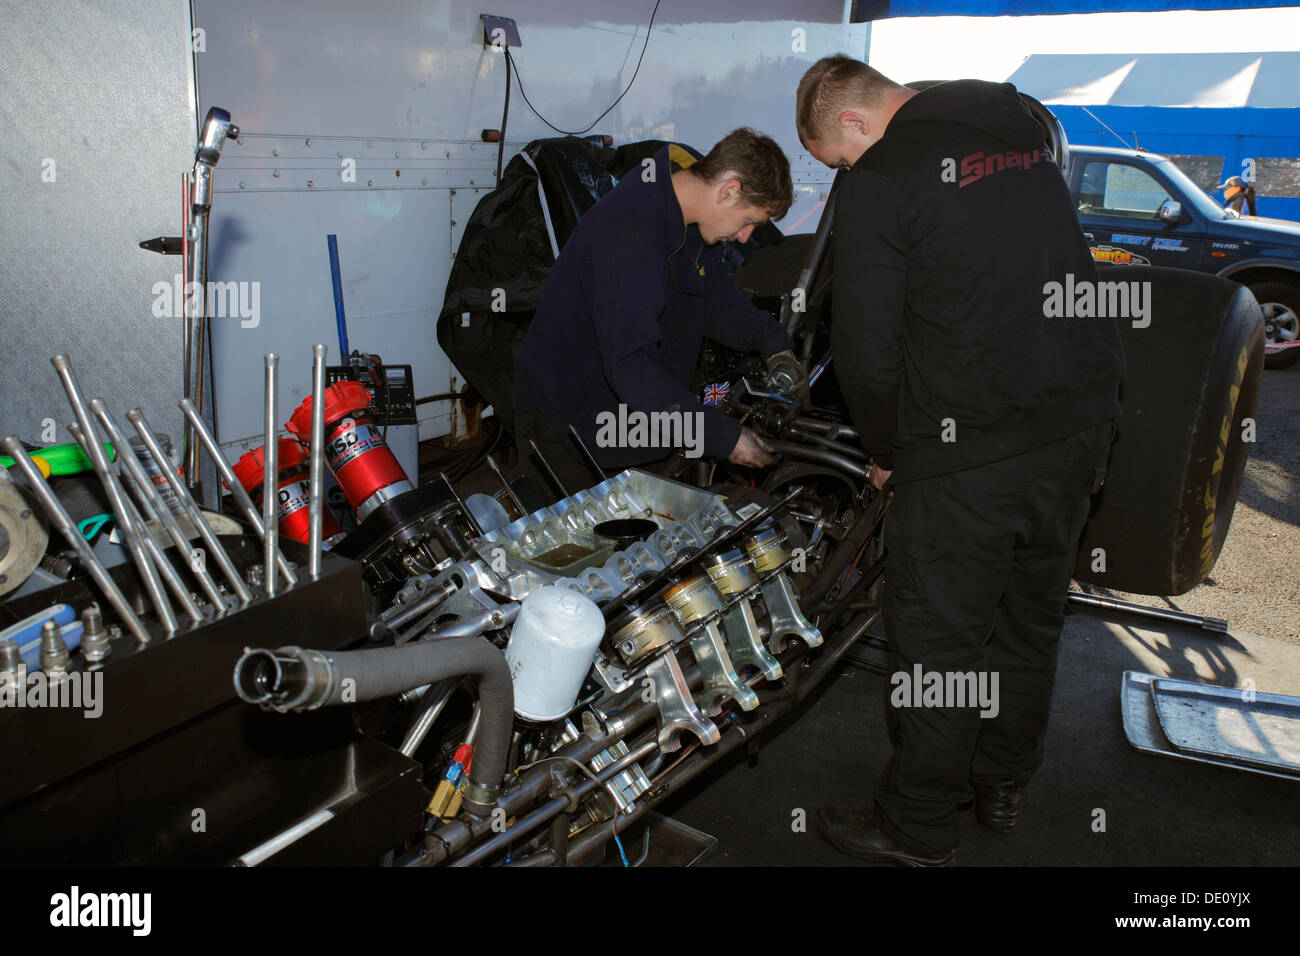 Mechanics working on their Ford Mustang Top fuel funny car dragster after an engine explosion at Santa Pod pits. Stock Photo